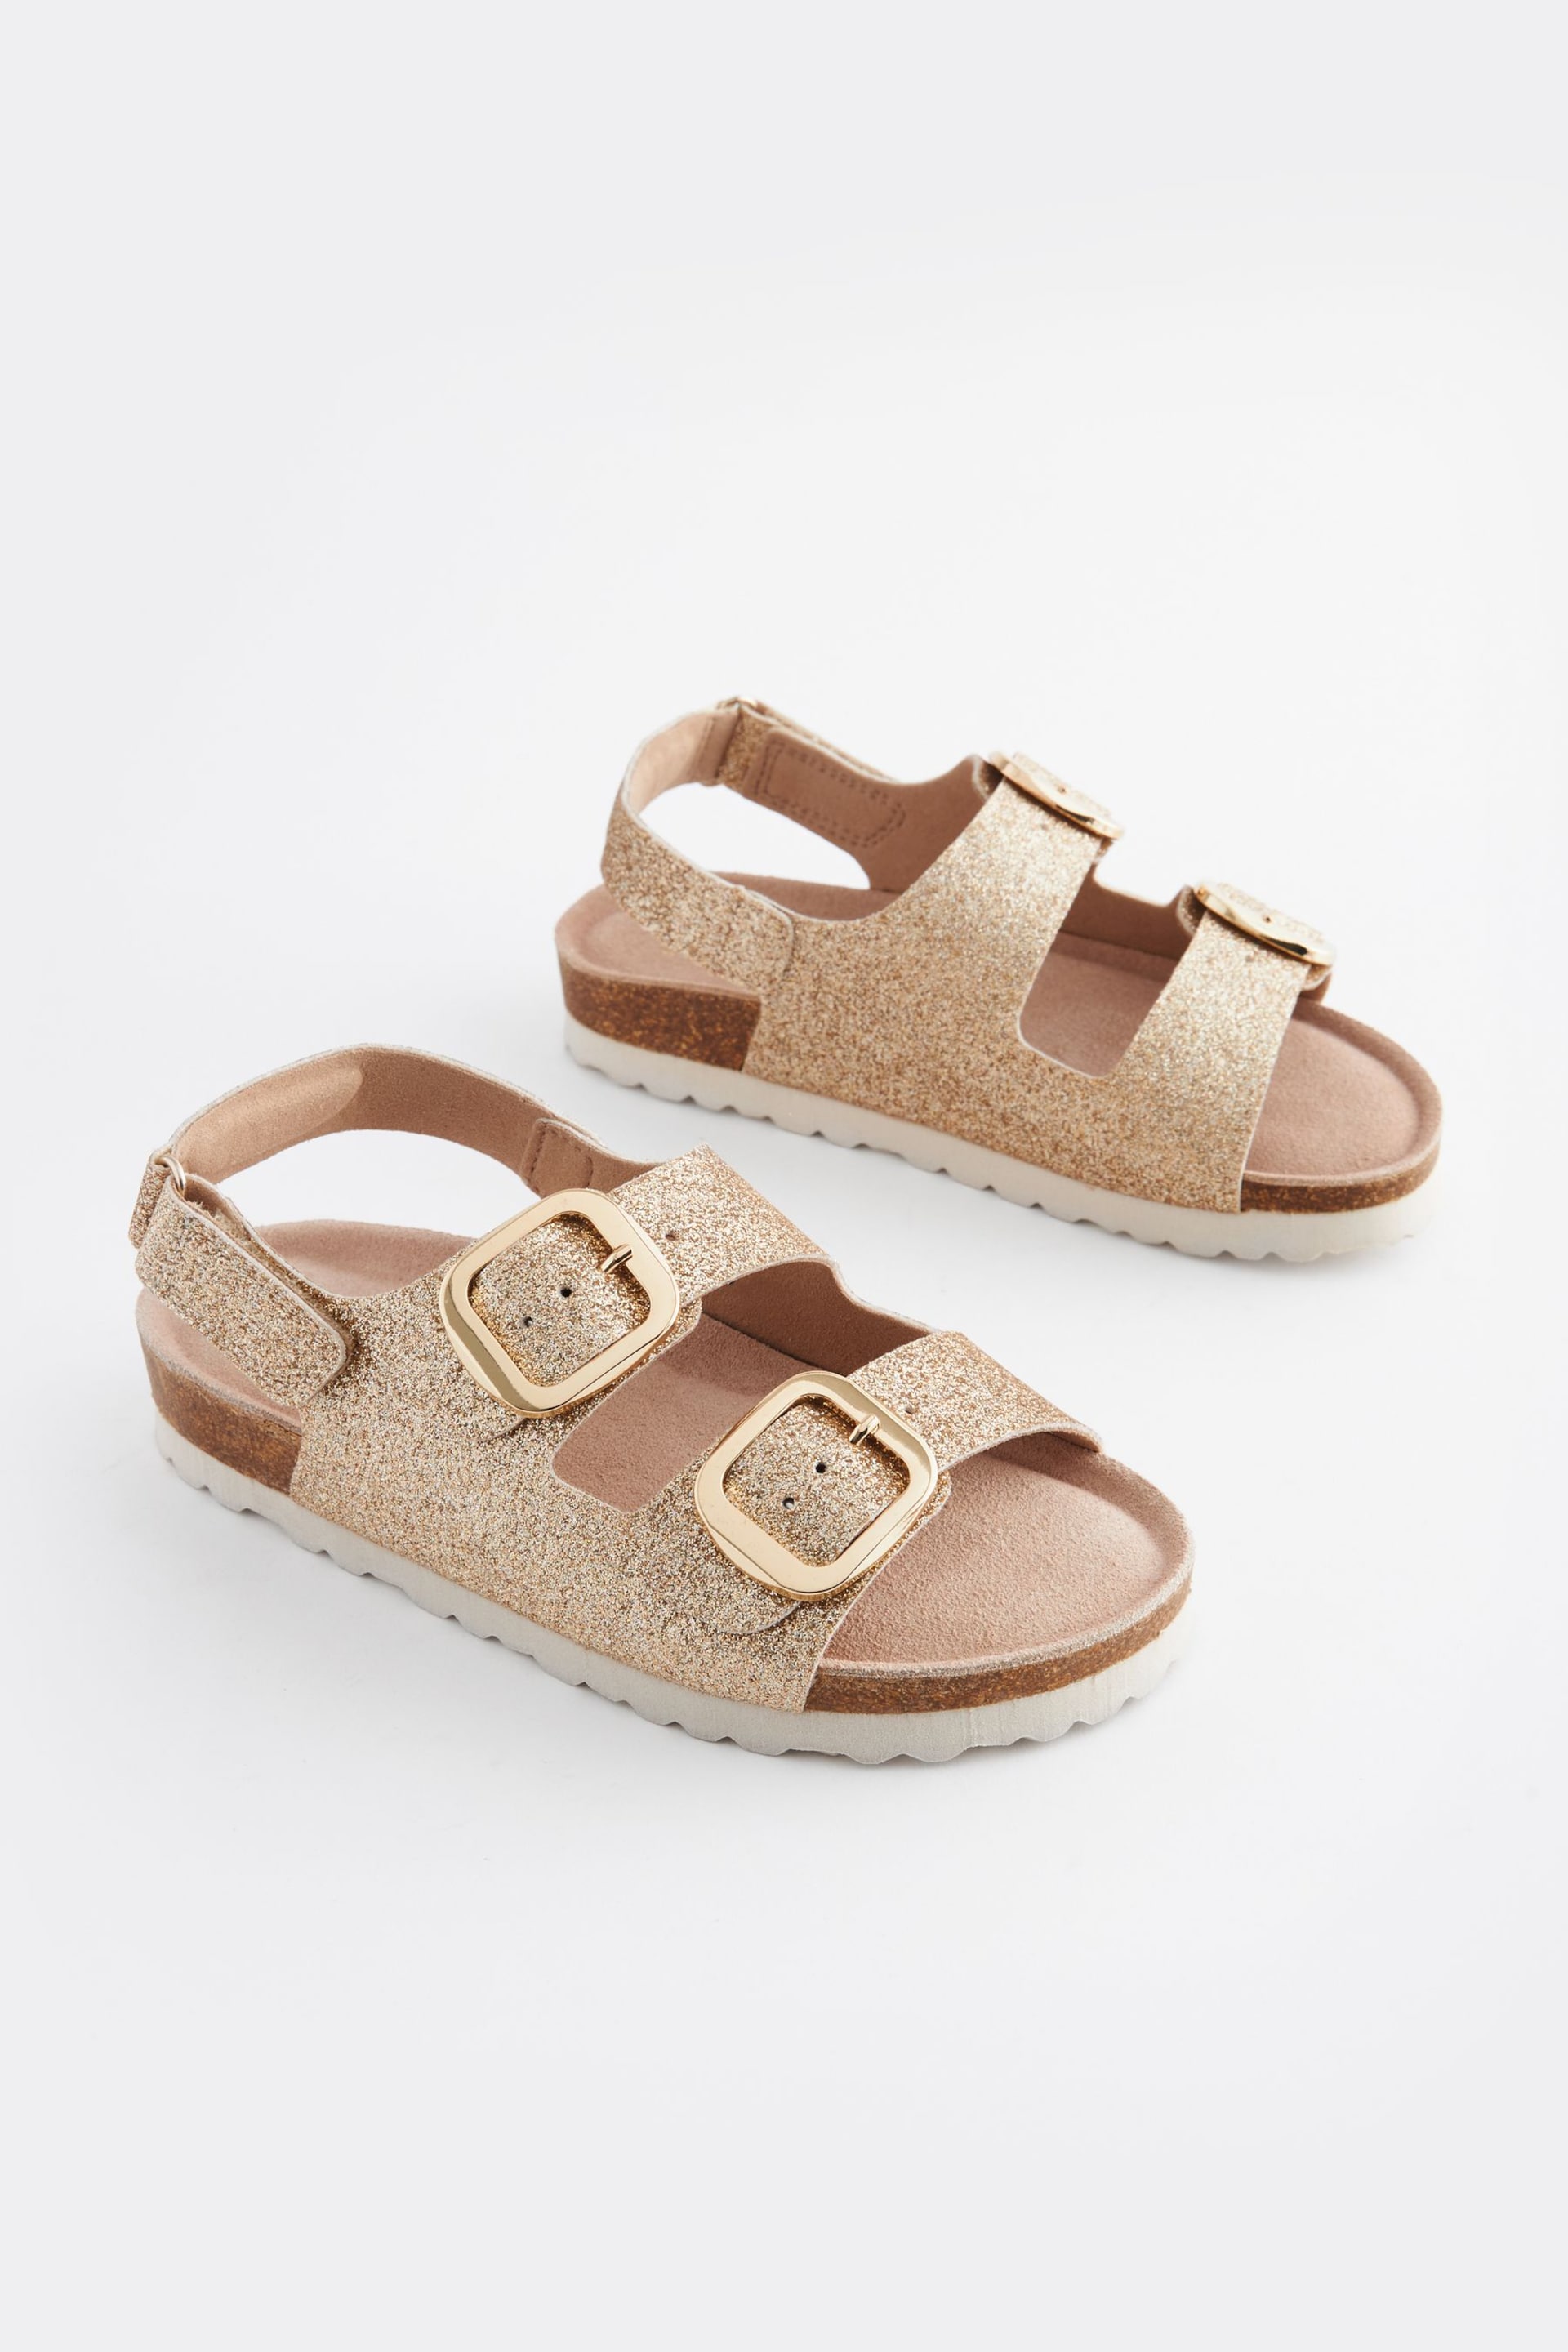 Gold Glitter Wide Fit (G) Two Strap Corkbed Sandals - Image 1 of 5